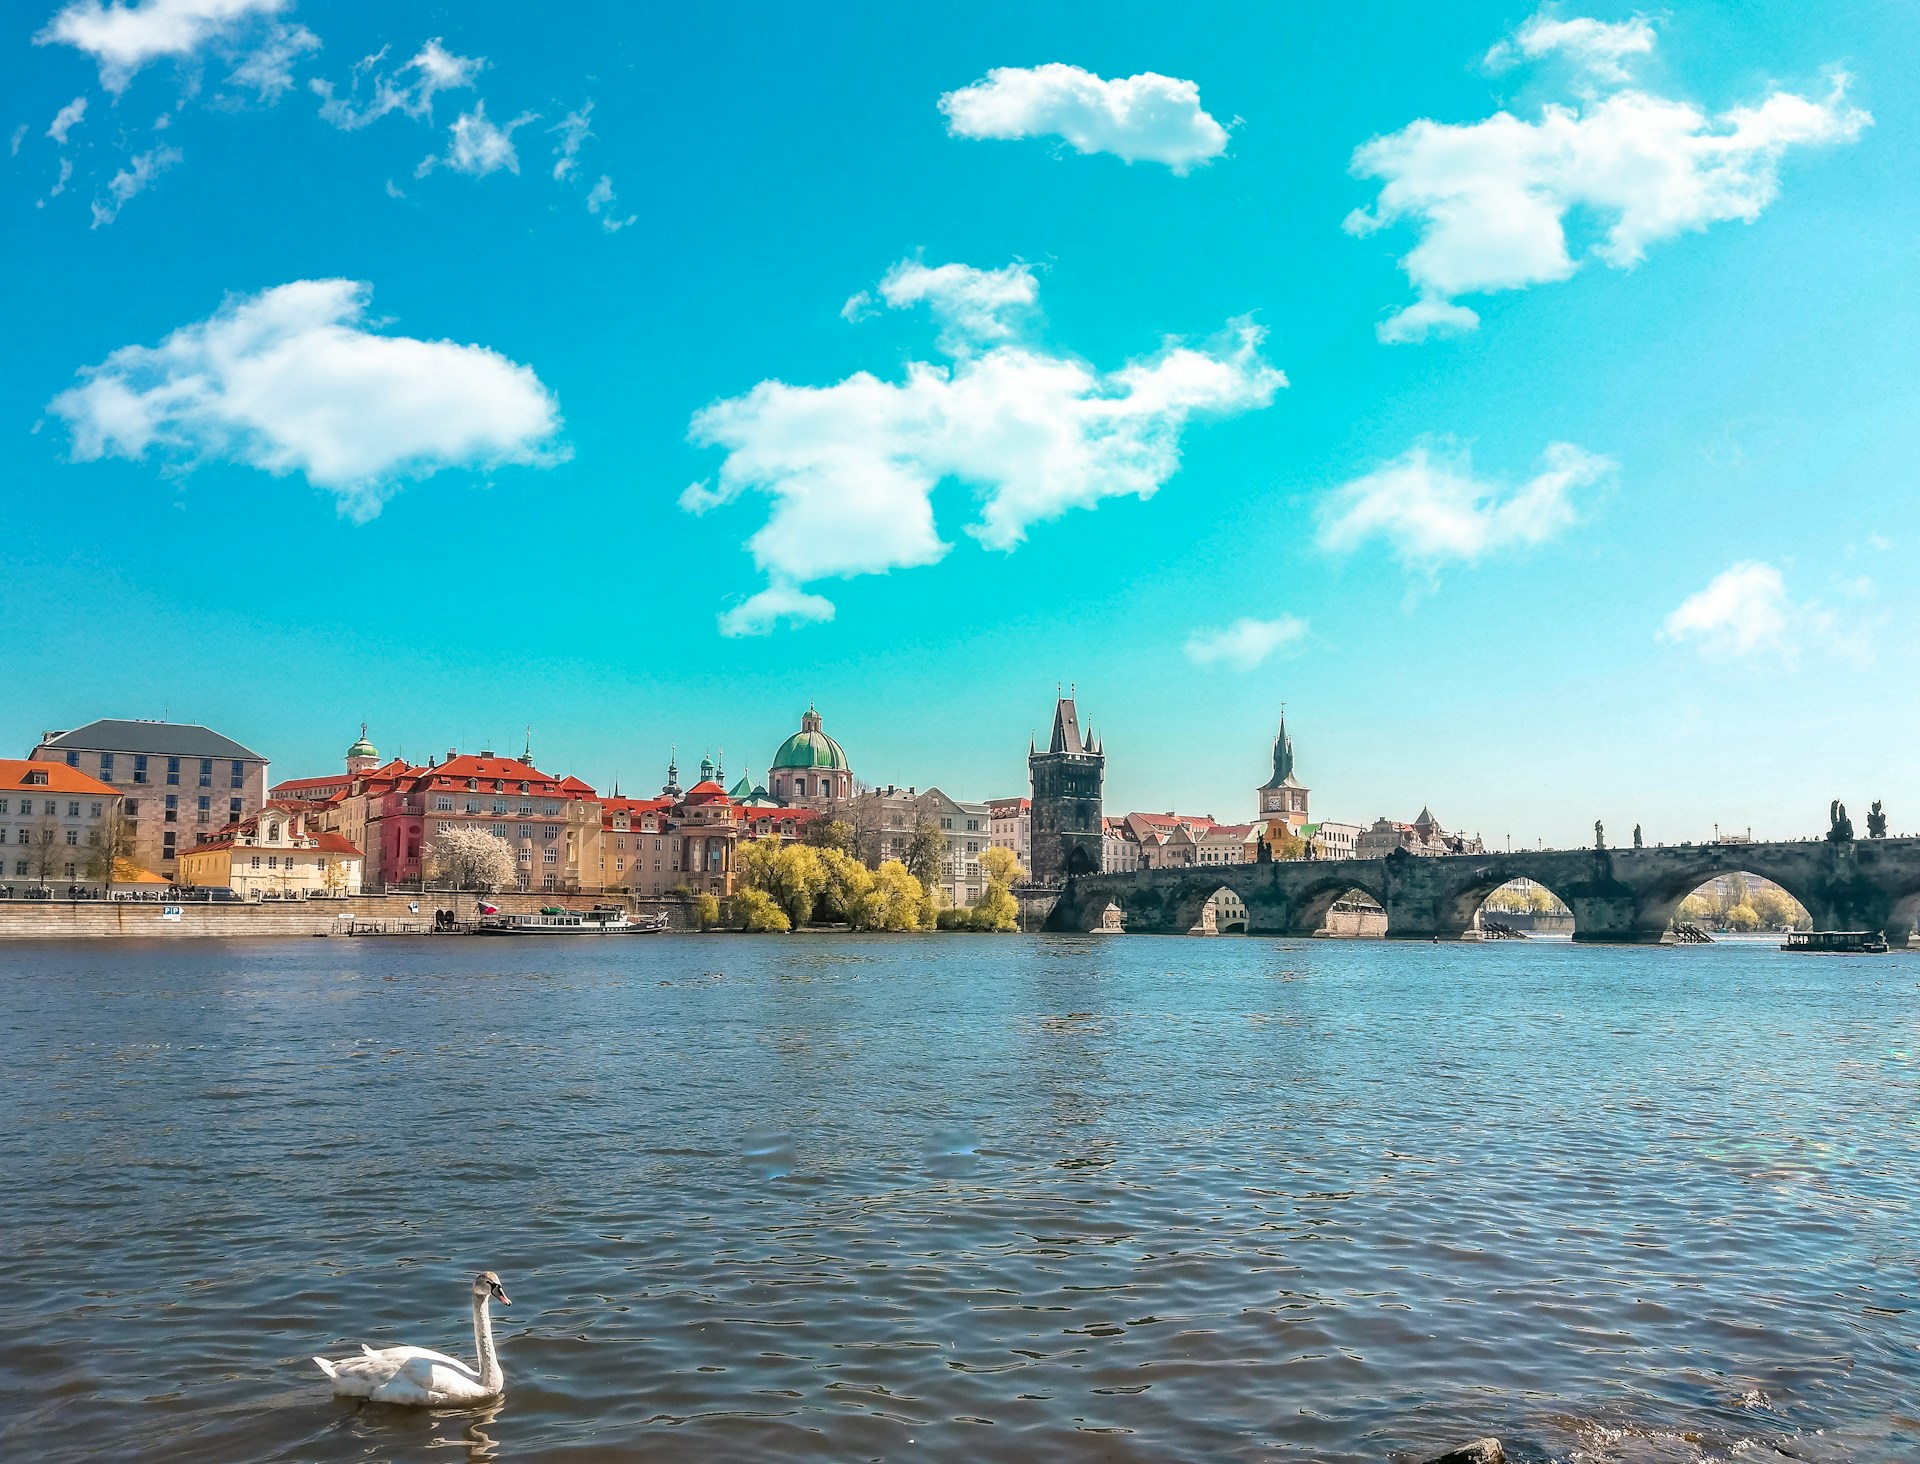 View of Prague from the river